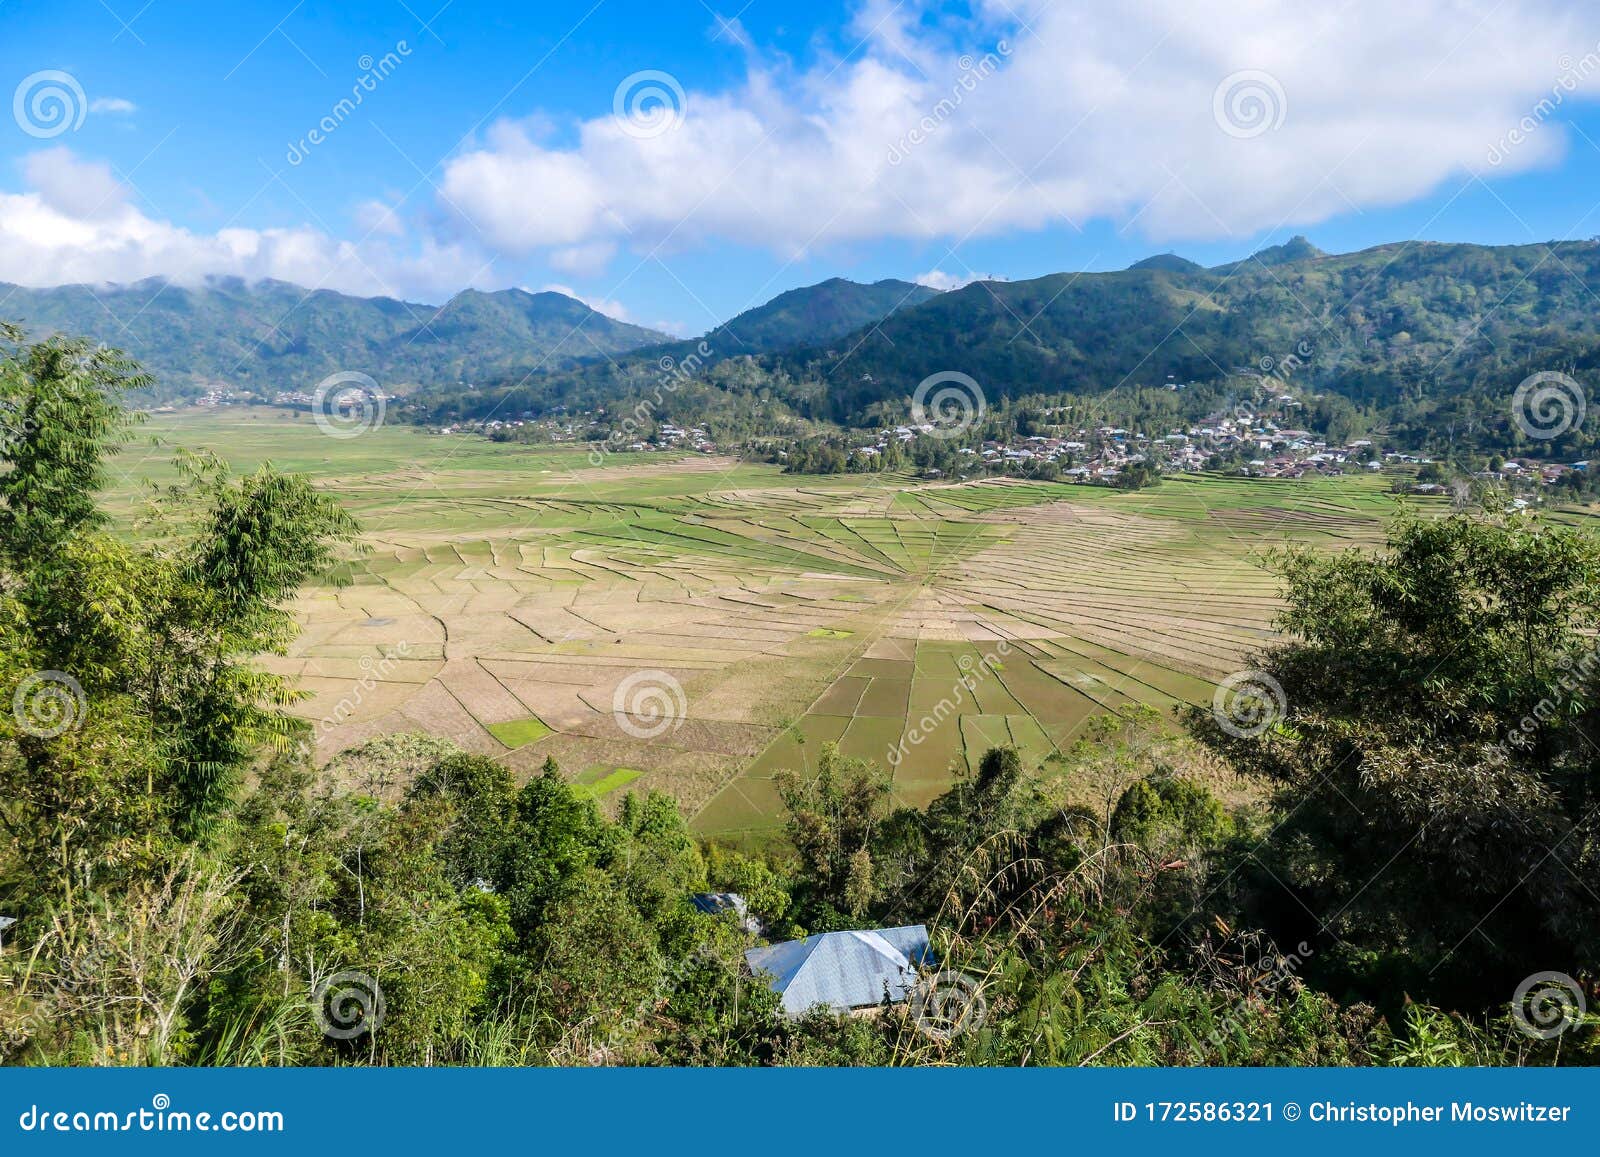 the colorful rice paddies forming a giant spider web in ruteng, on island of flores, indonesia, seen from above. there are